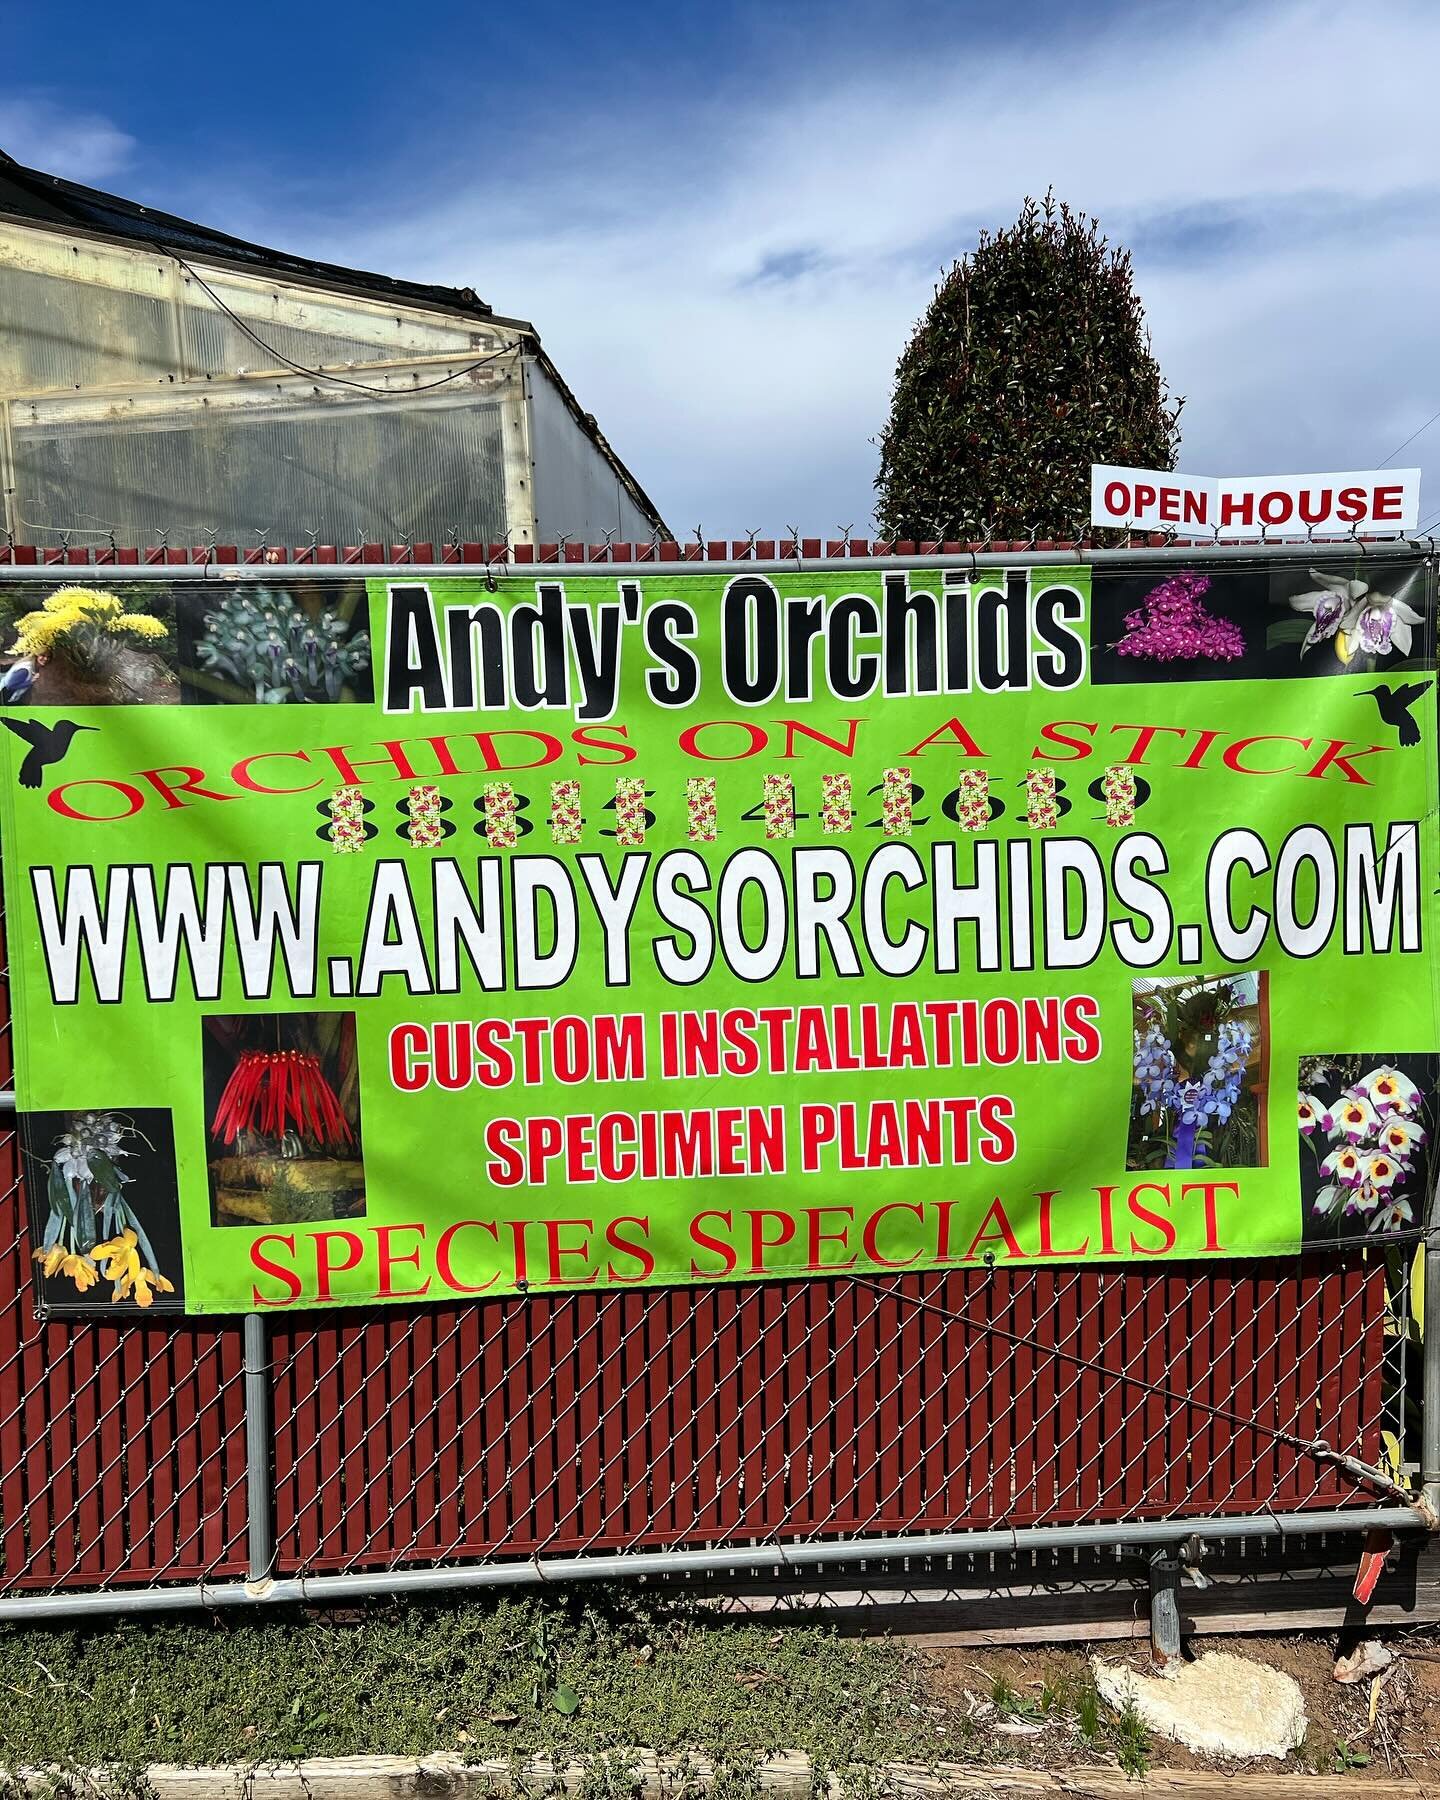 Andy&rsquo;s Orchids normally not open to the public but was this weekend and amazing that something so cool is right in our backyard. @andysorchids @cityofencinitas #sandiego